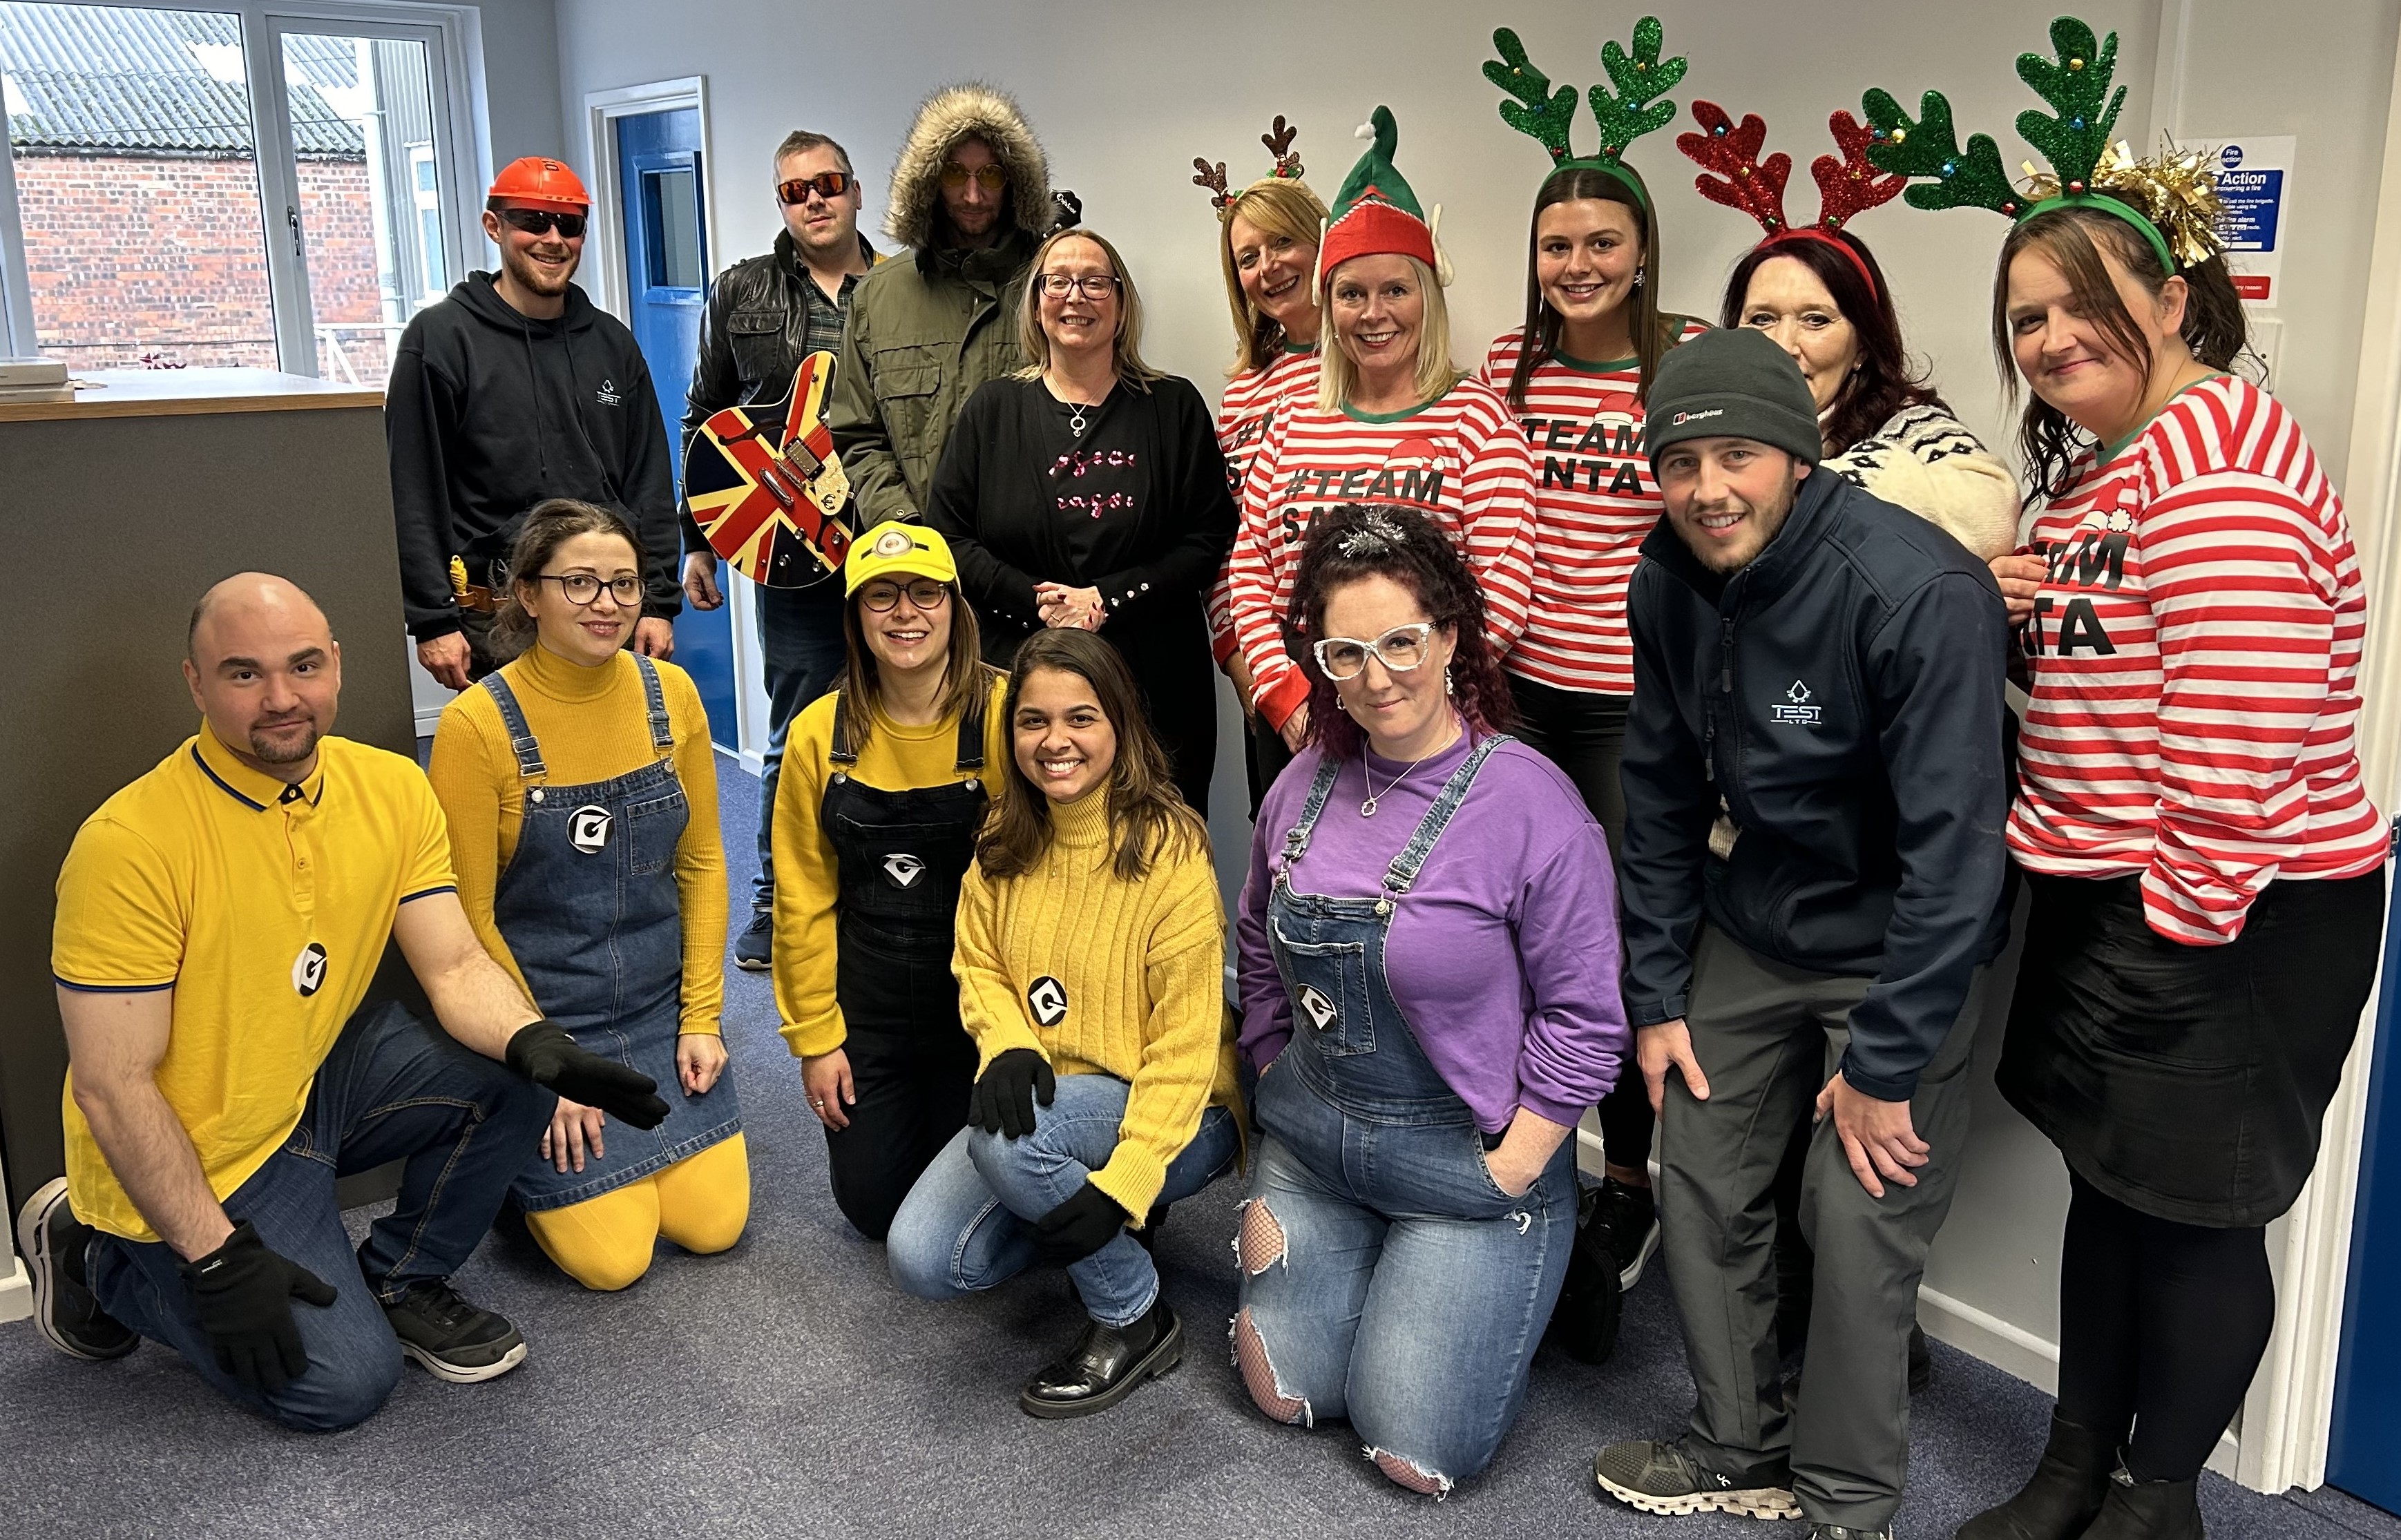 TEST Ltd Staff Christmas fancy dress in aid of BowelBabe, a cause close to our hearts.